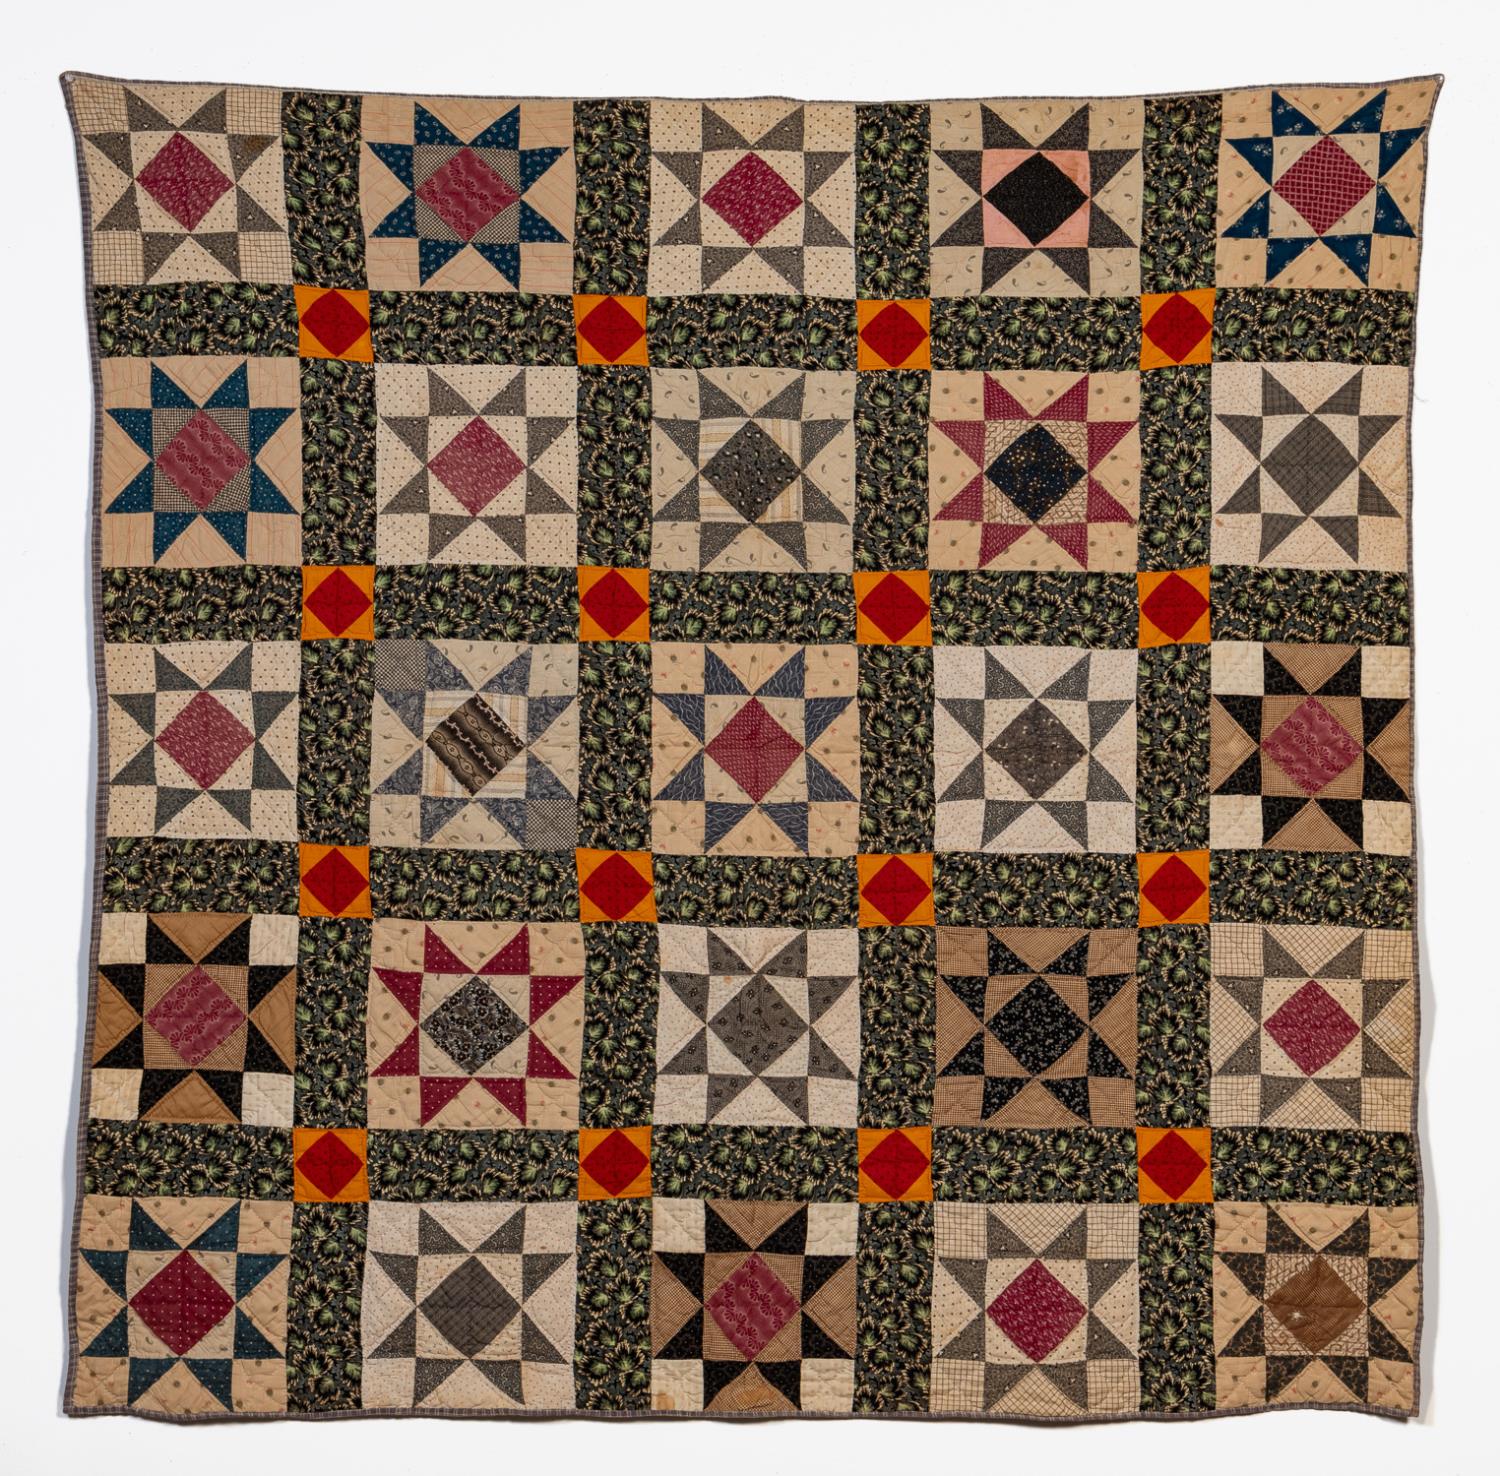 HAND QUILTED COTTON OHIO STAR PATTERN 35932e